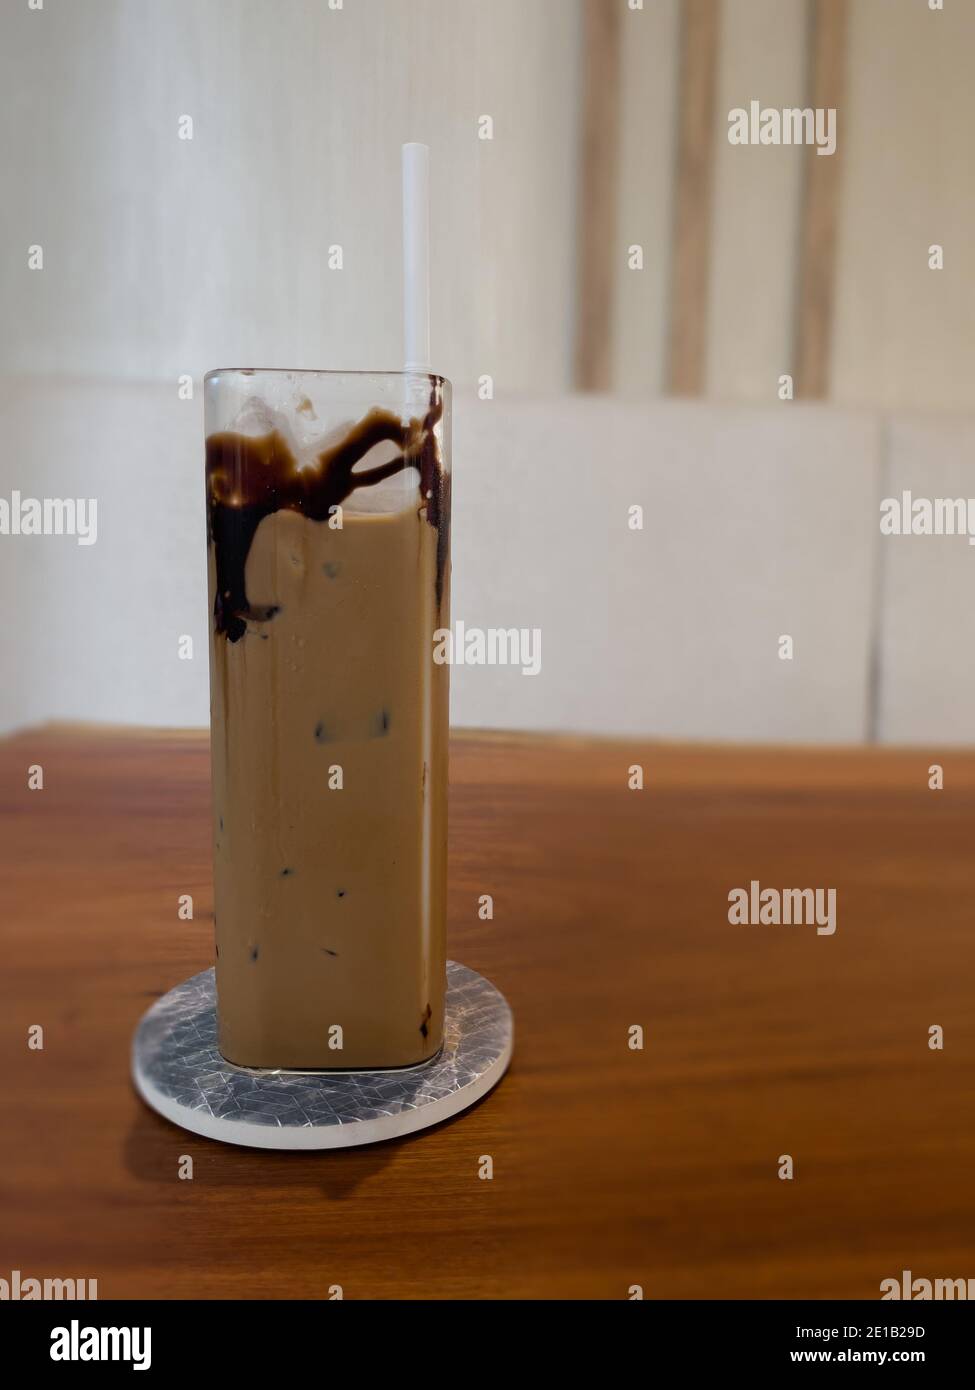 Iced coffee on wooden table, stock photo Stock Photo